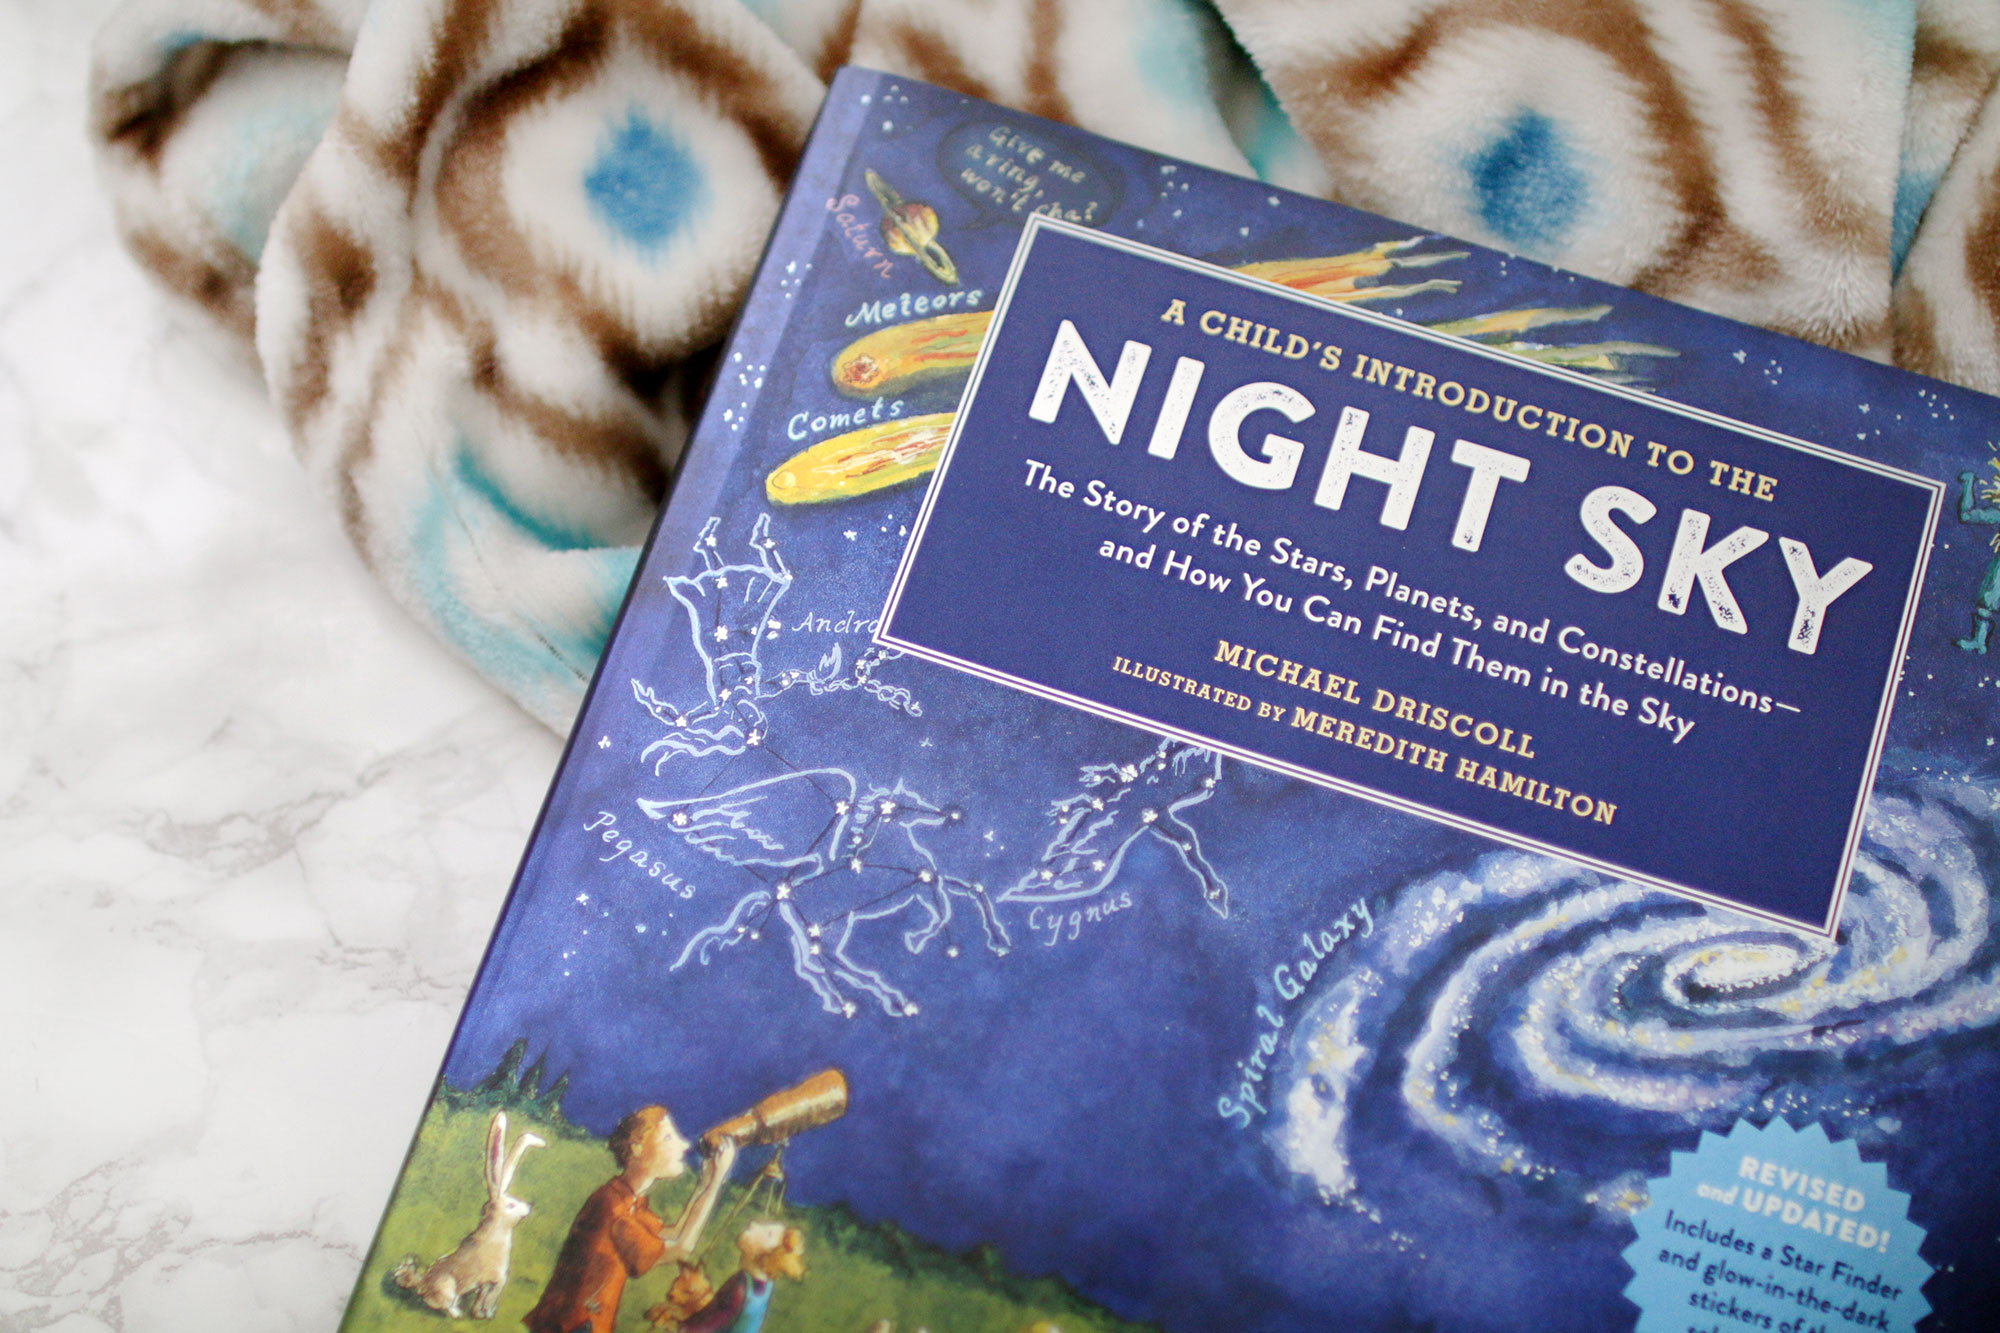 A Child’s Introduction to the Night Sky